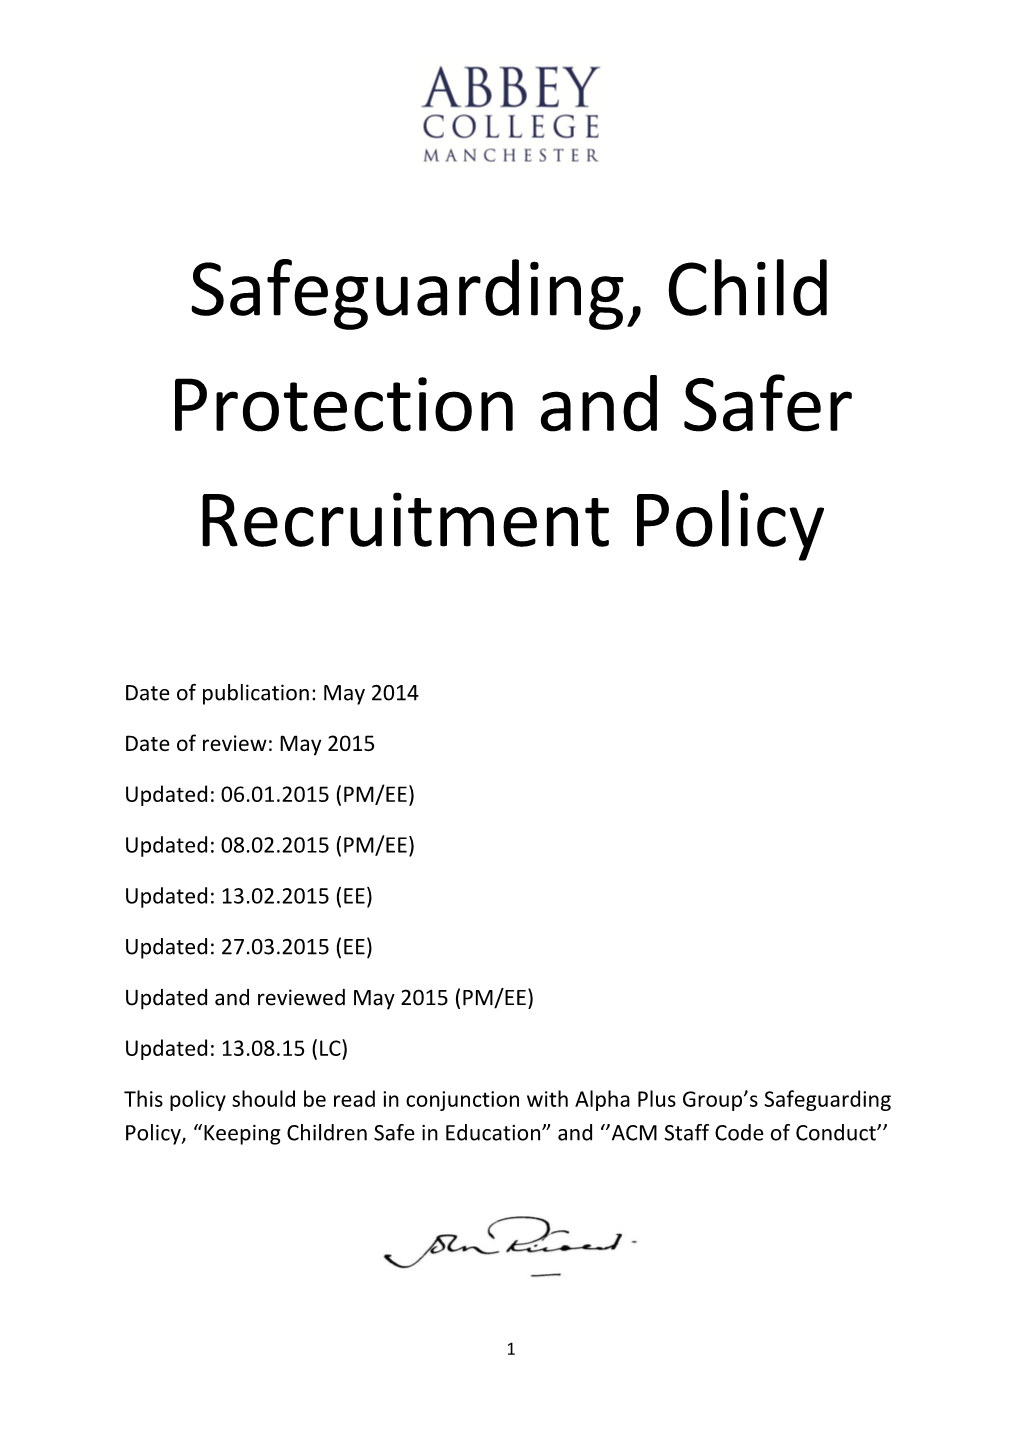 Safeguarding, Child Protectionand Safer Recruitment Policy